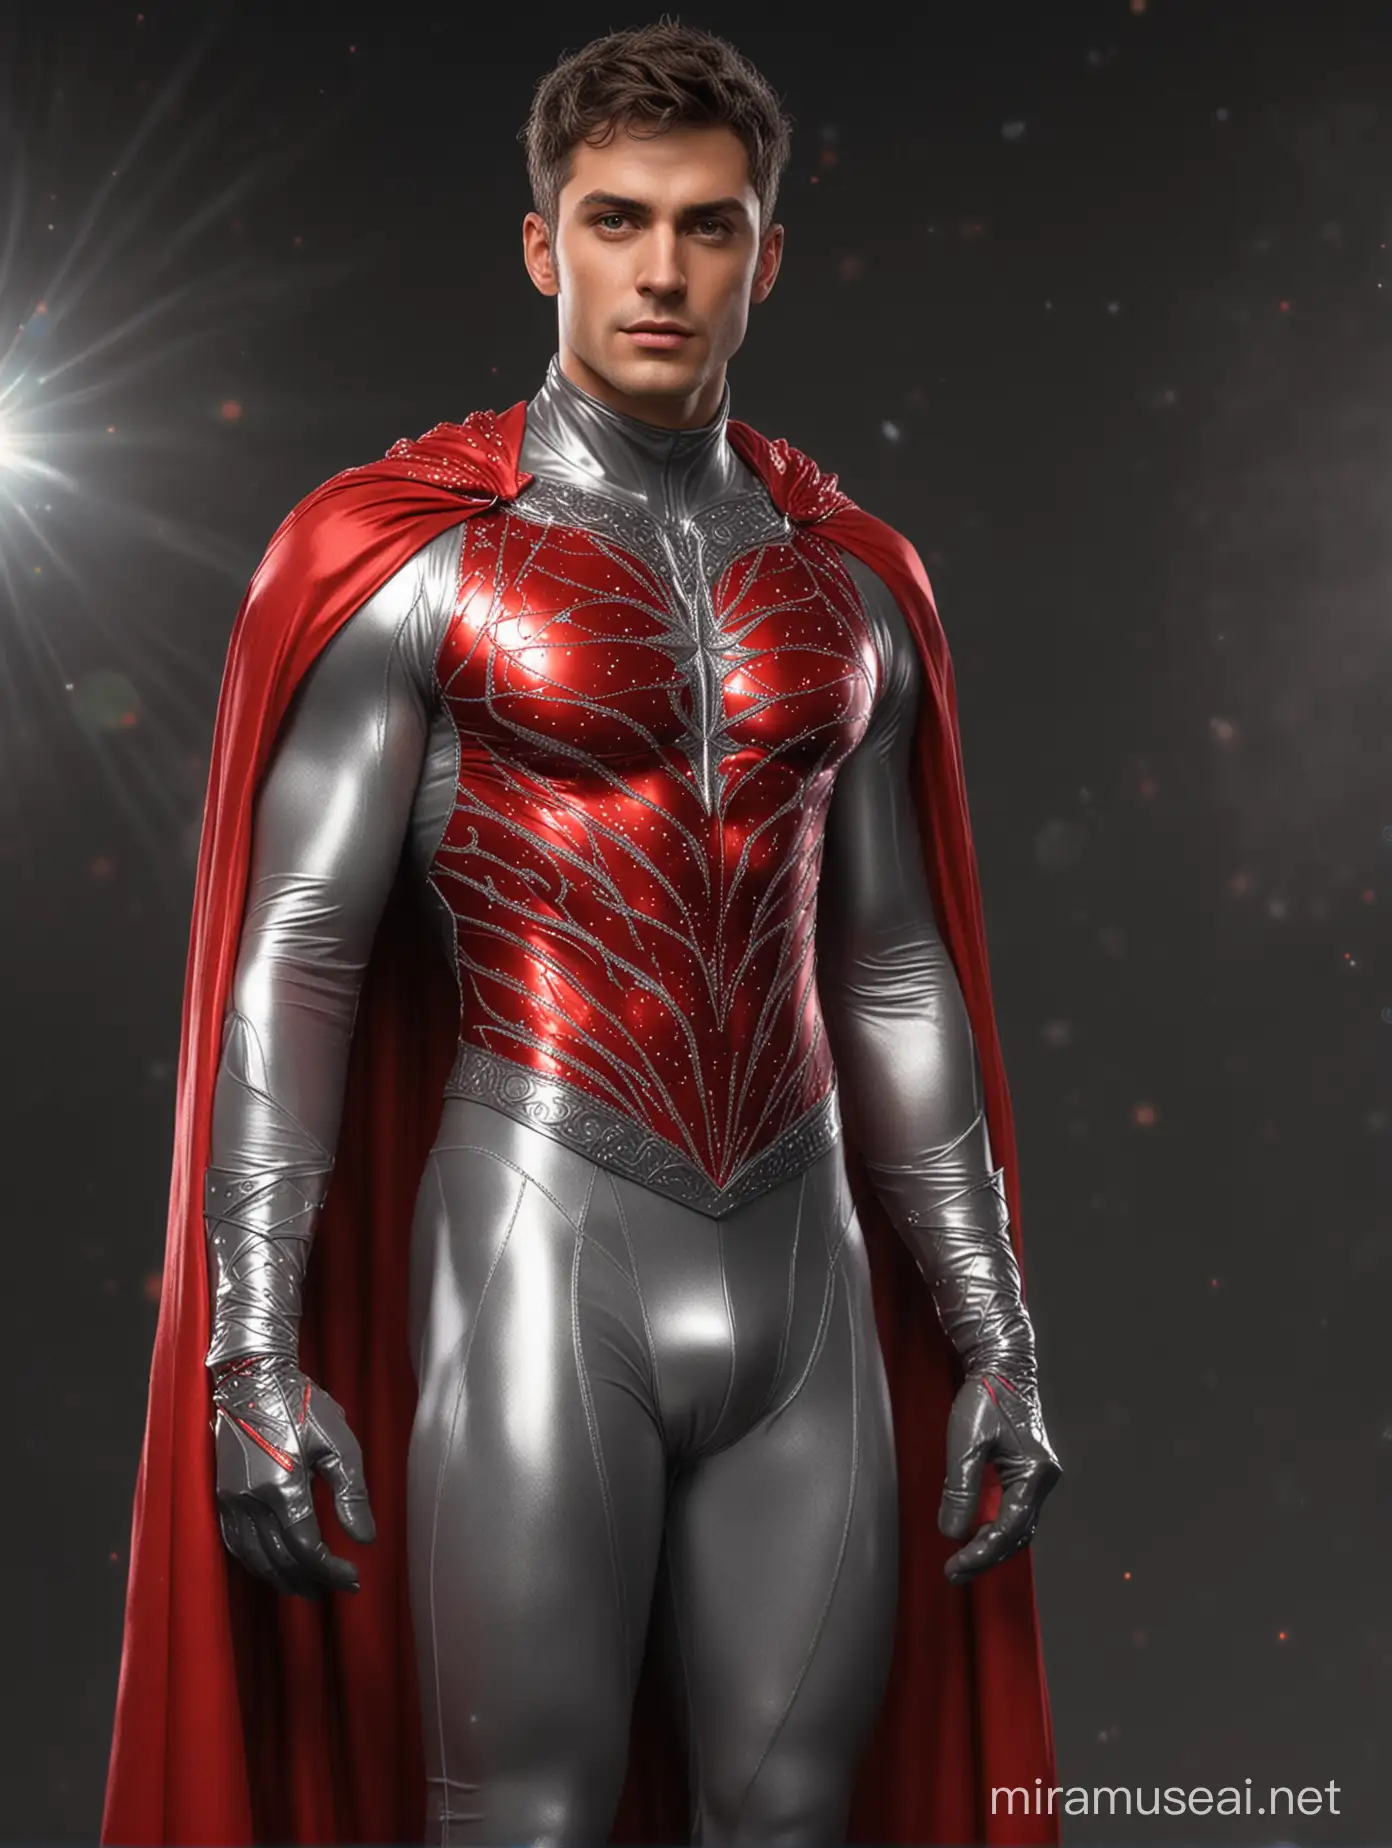 Handsome Celestial Islaw Zayne in Red Biomorphic Spandex with Cape